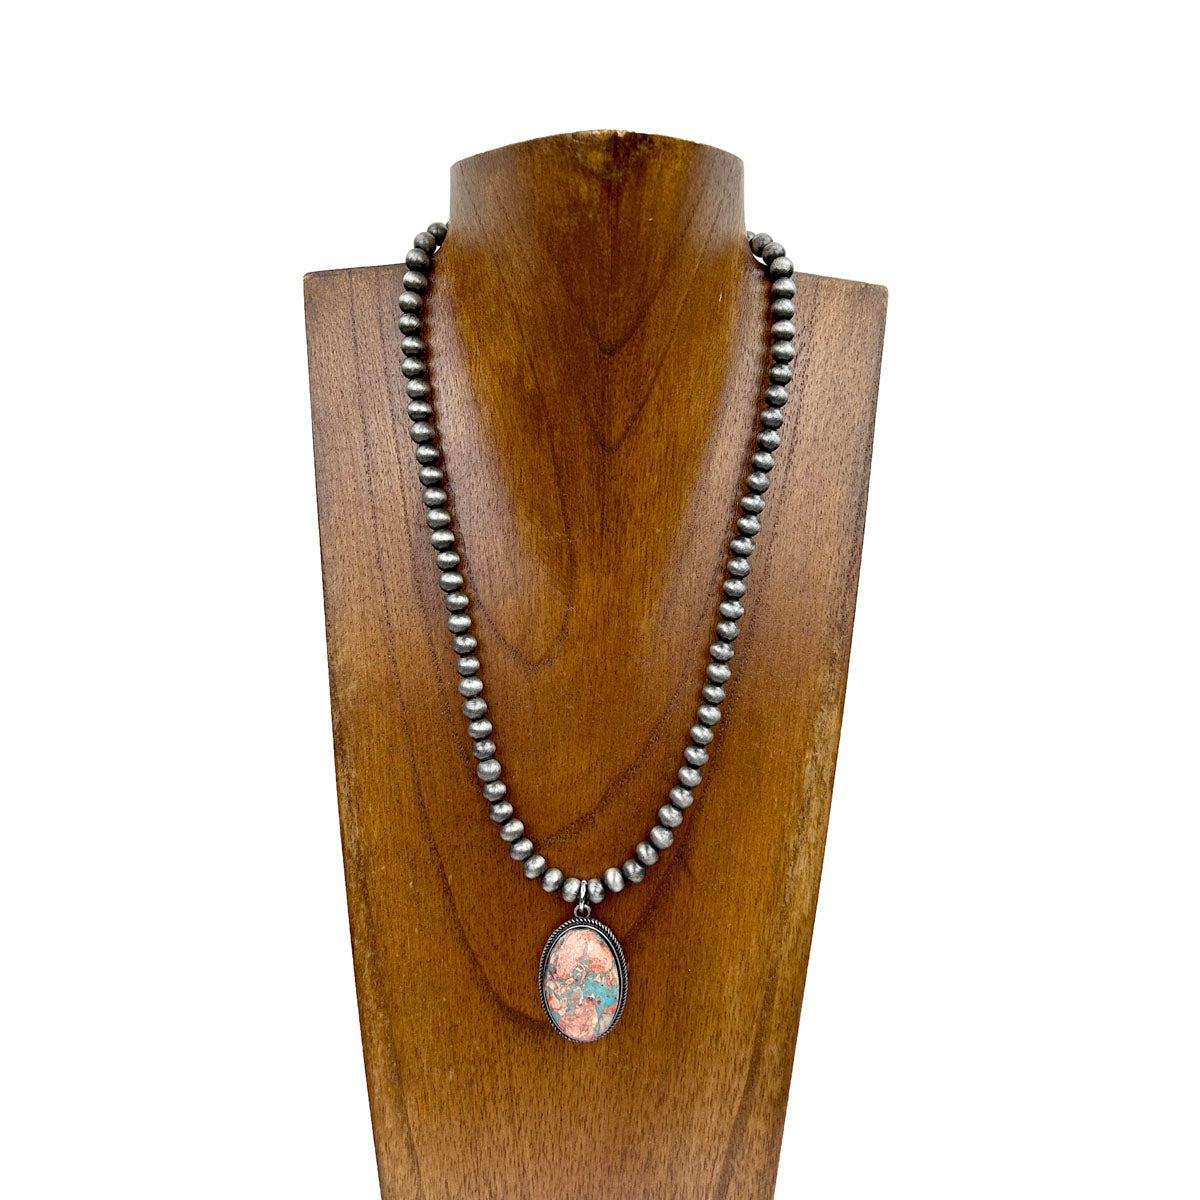 NKY230530-02-B	                    "17 Inches 6mm silver Navajo pearl beads with oval oyster  copper turquoise pendant Necklace"